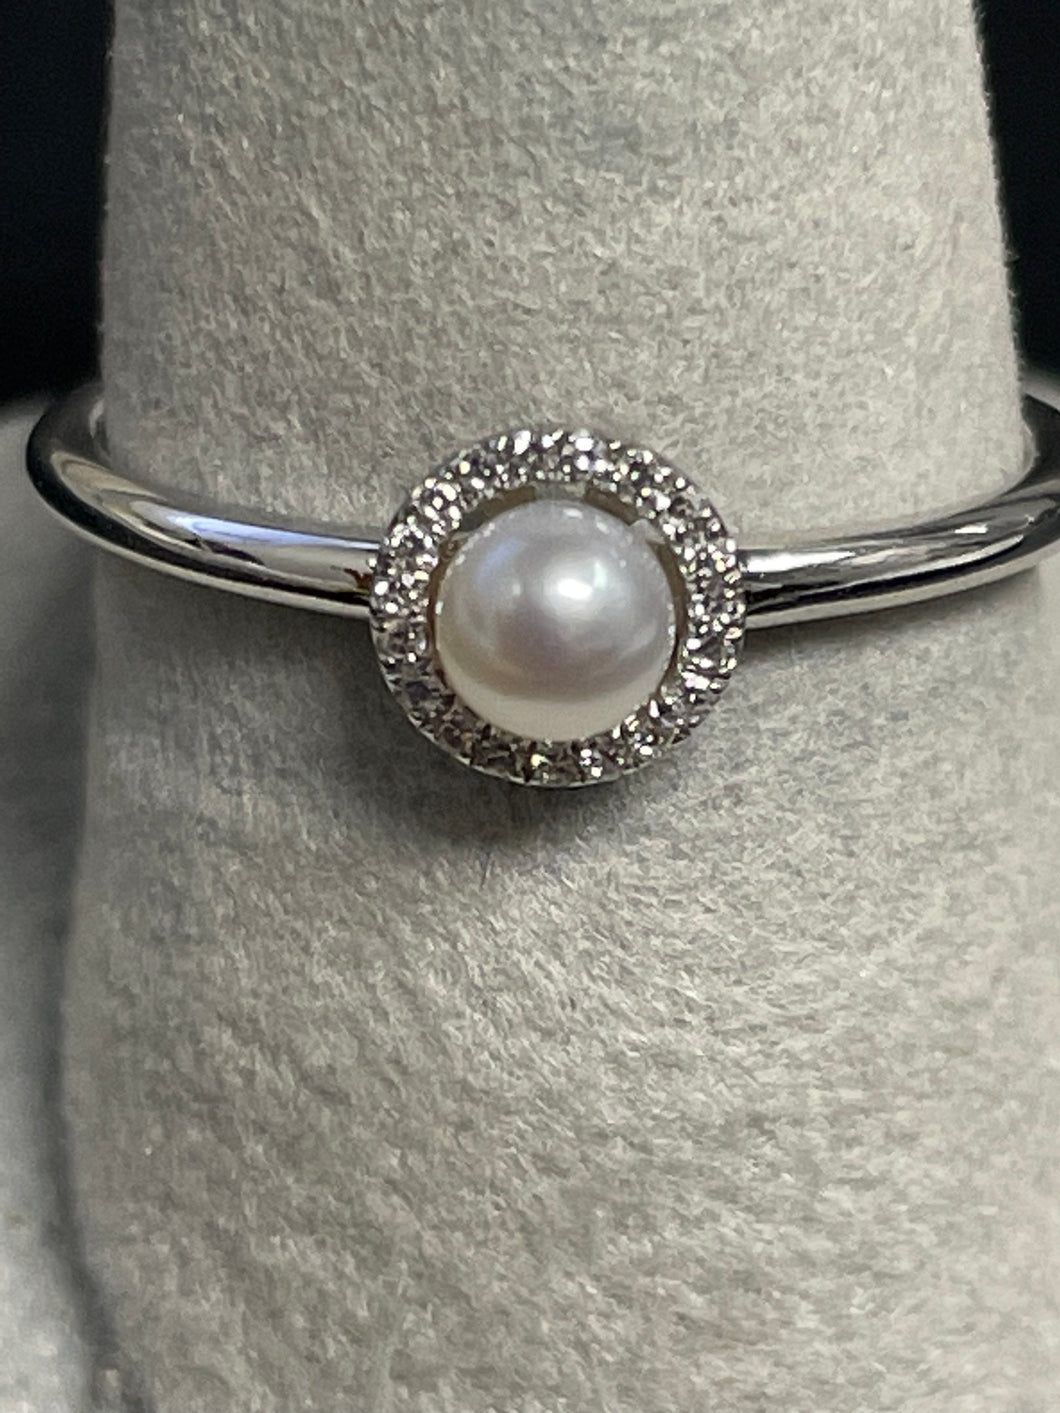 One Ladies 14k White Gold Pearl and Diamond Halo Ring